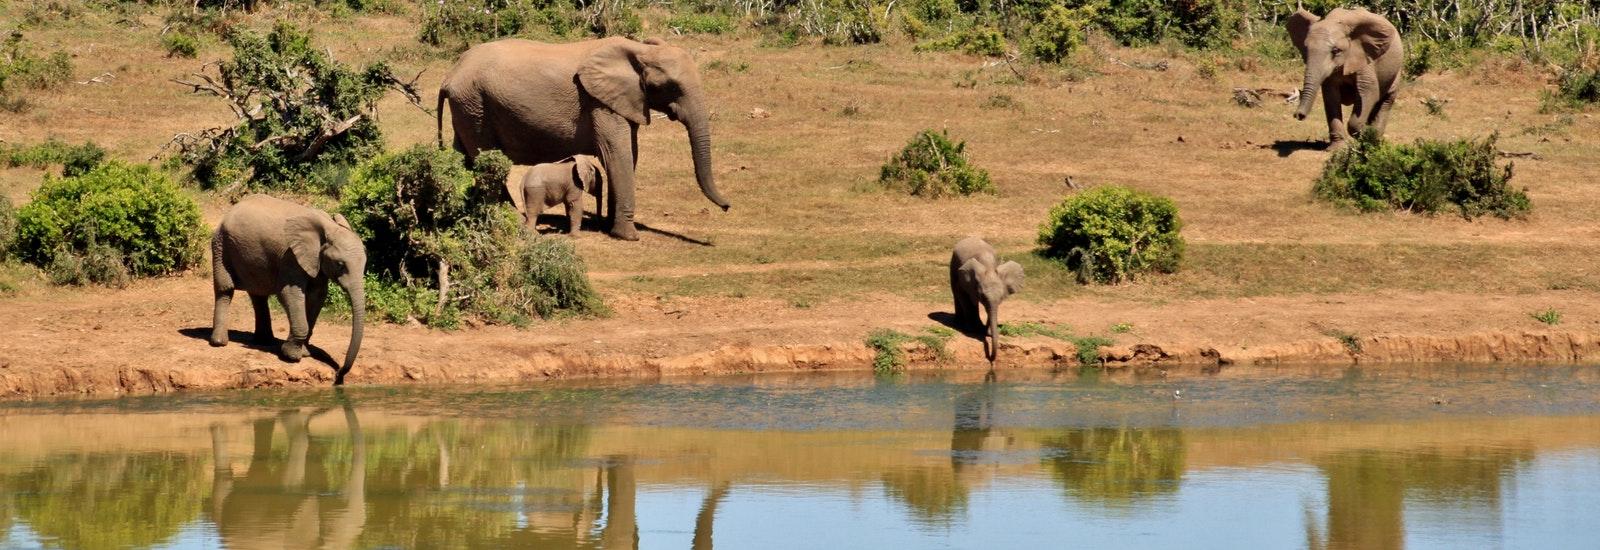 Elephants along a River in Africa